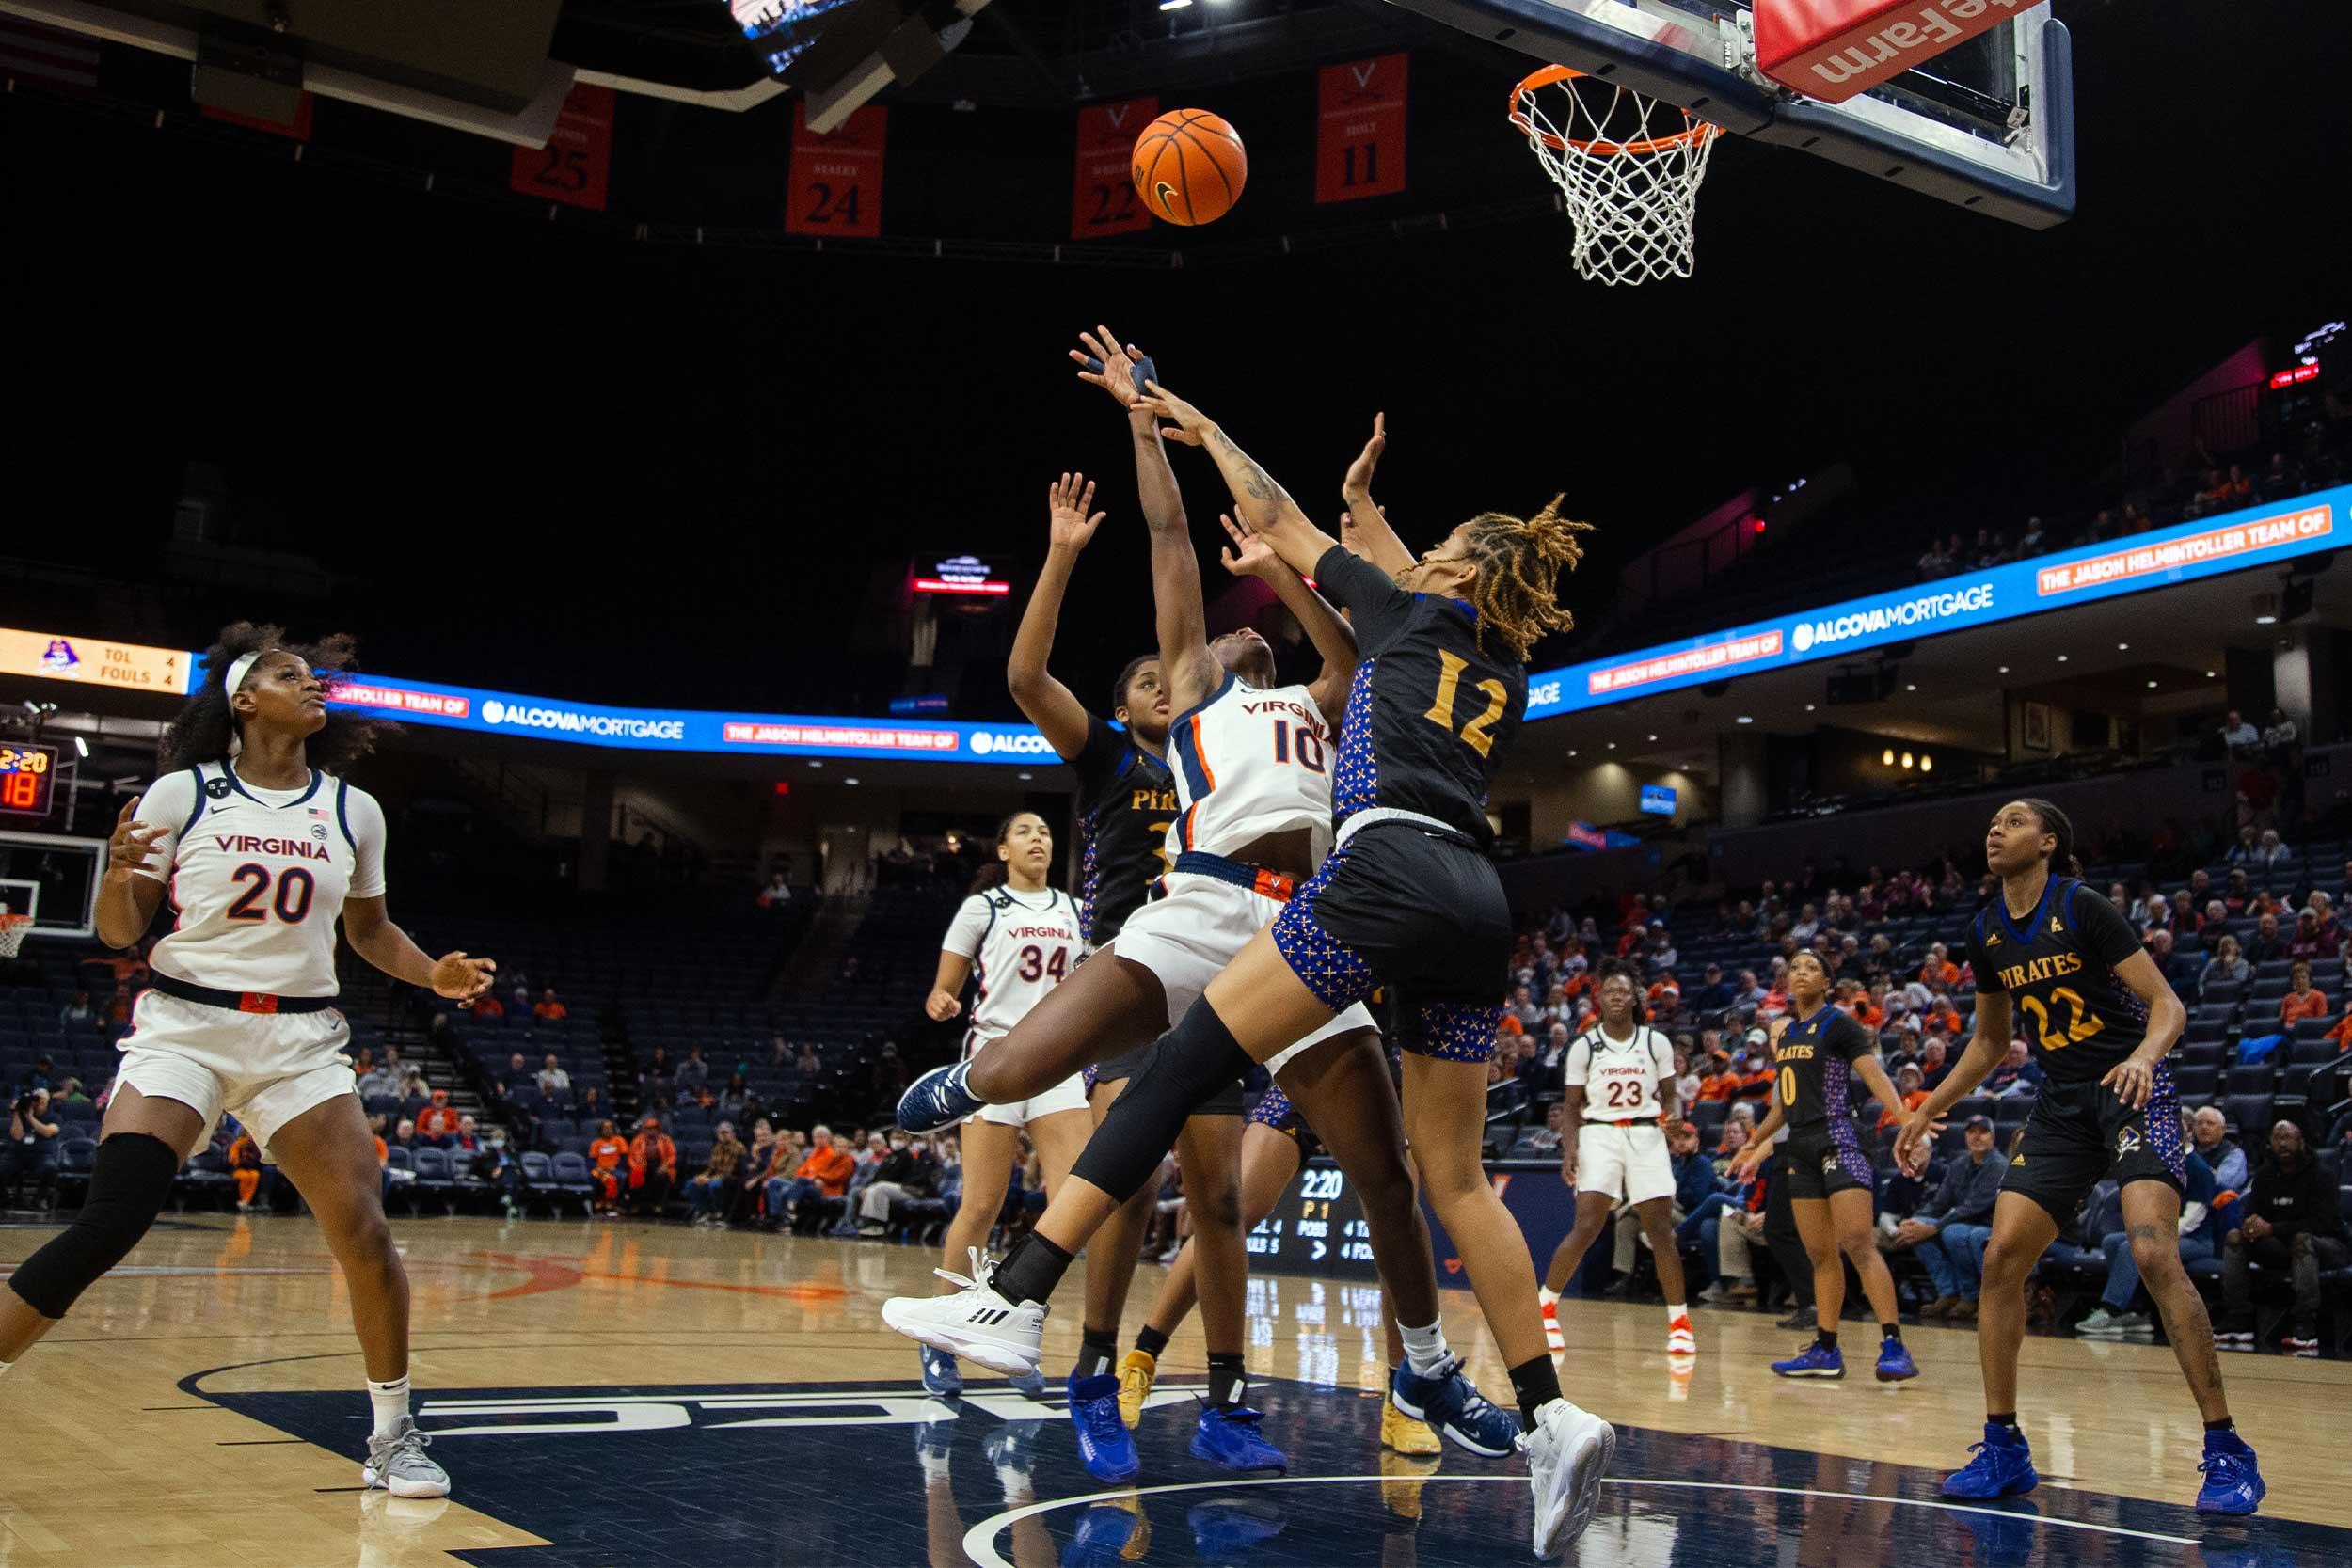 UVA basketball players jumping for the ball against opponents at the net